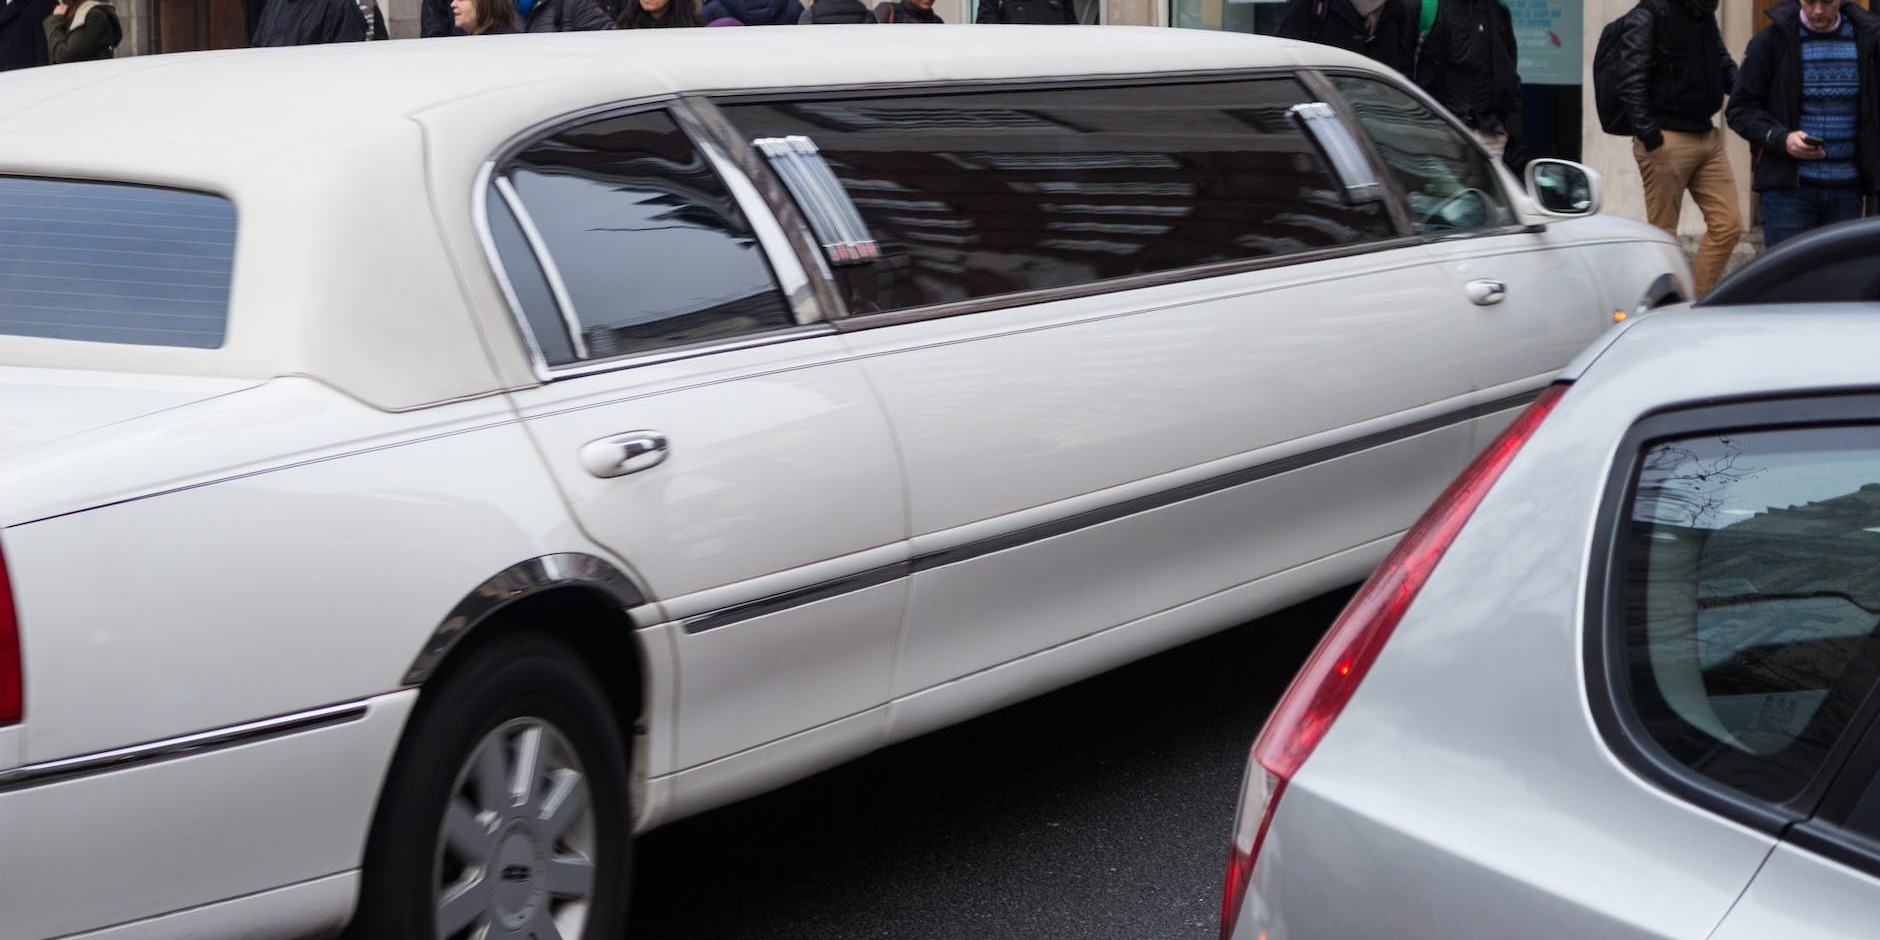 Top Tips for Hiring a Prom Limo That Will Turn Heads